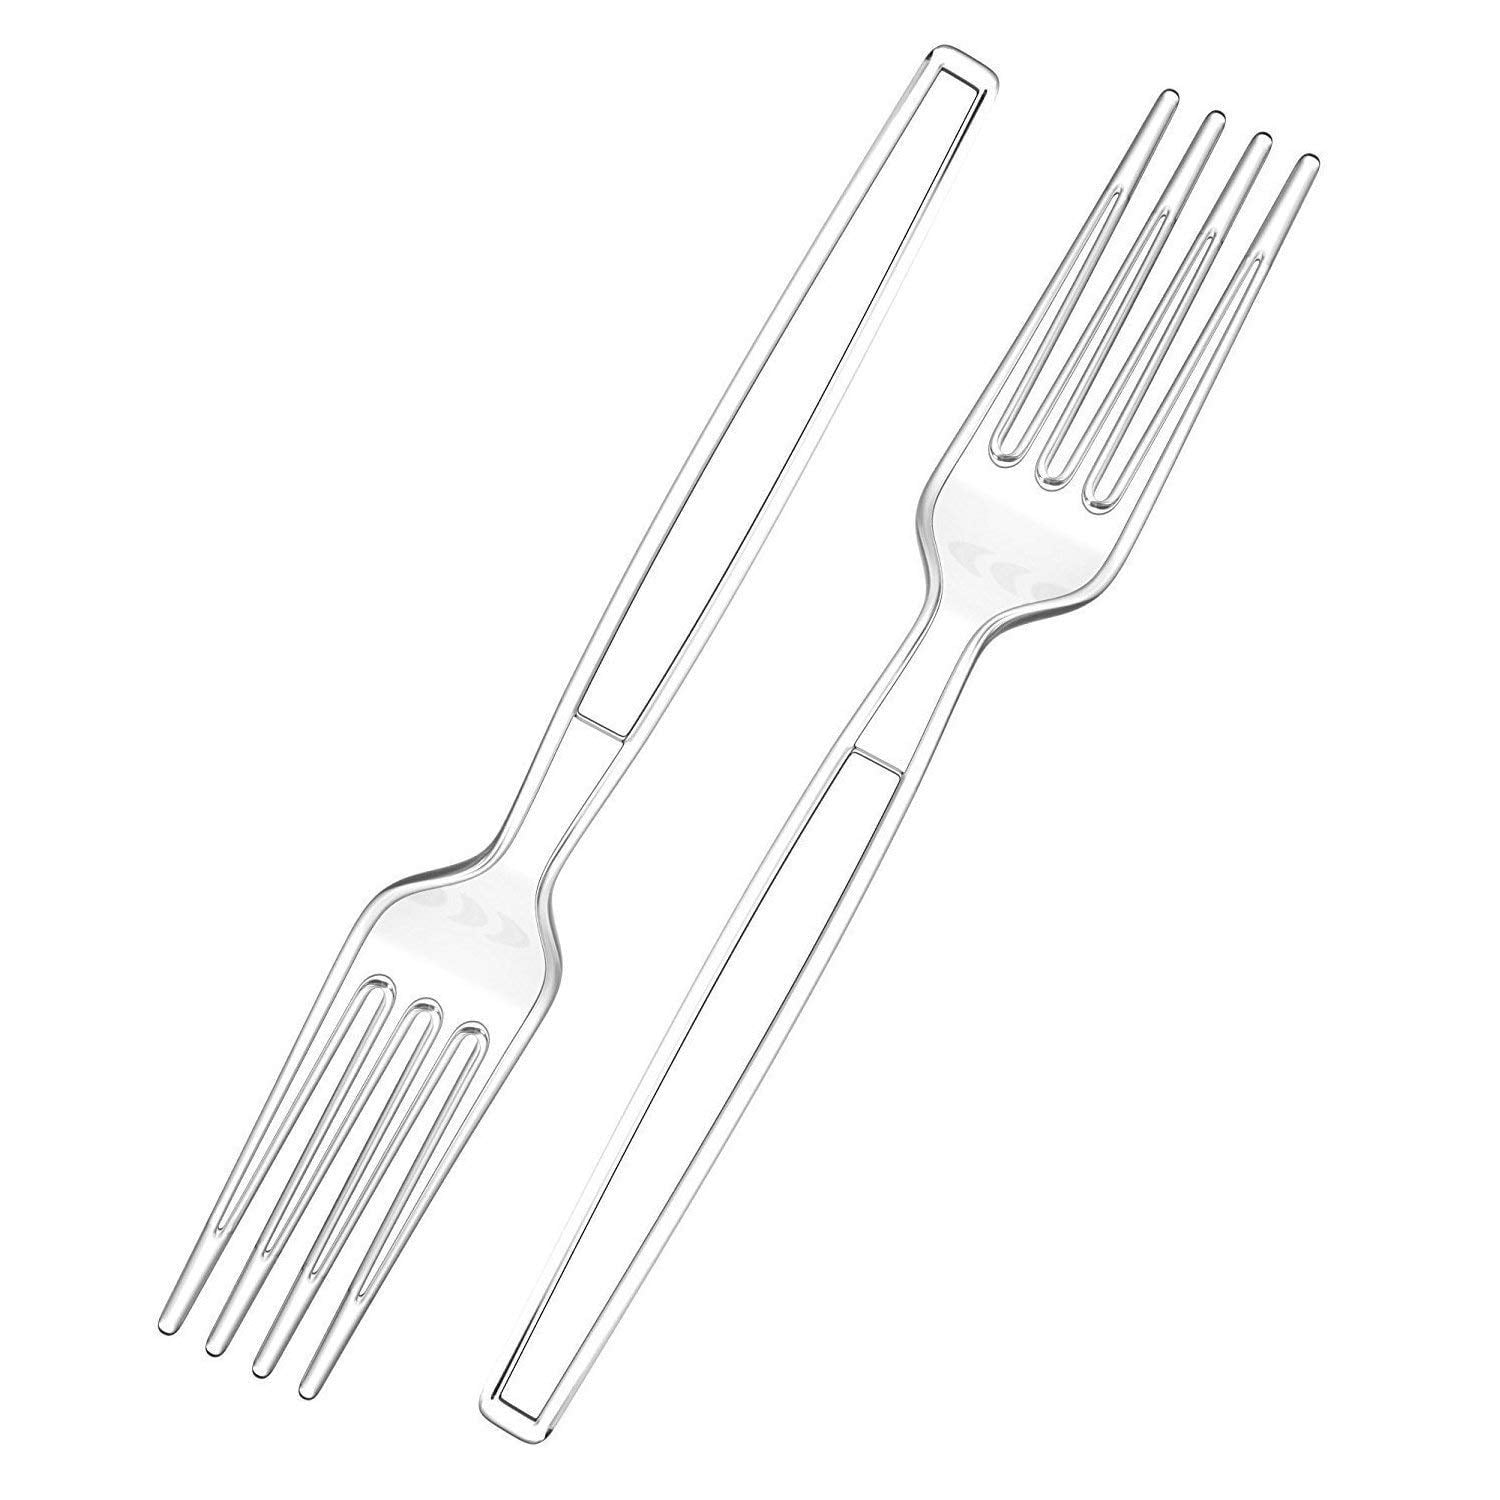 Mini Tasting Forks Dessert Shooters Disposable Forks for Salad Black Catering Party Supplies 150-Pack Plastic Tasting Sampling Forks Set Small Appetizers Fruit 3.5 x 0.6 Inches